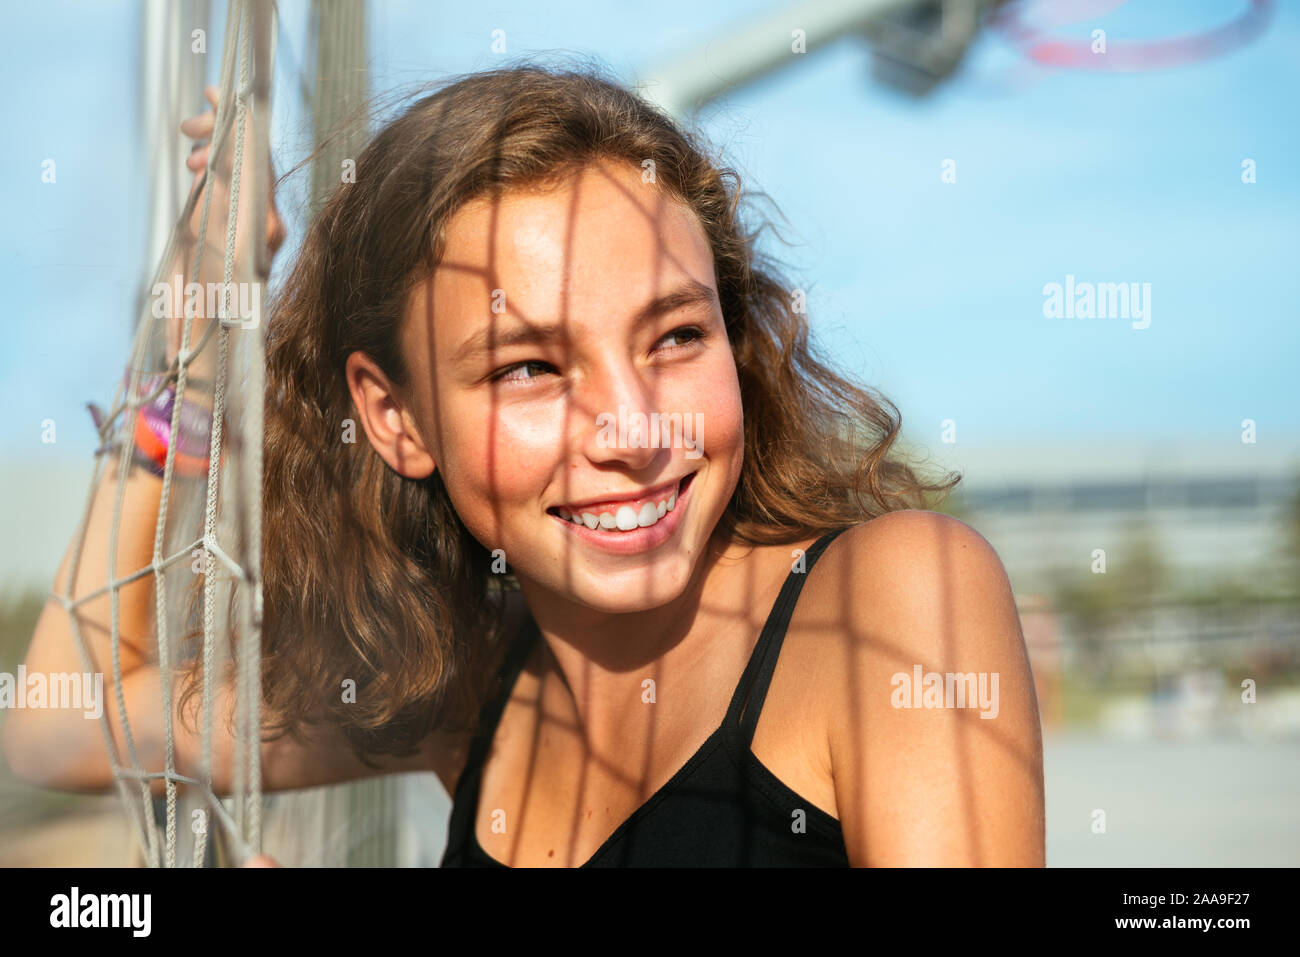 Portrait of teenage girl at park Stock Photo